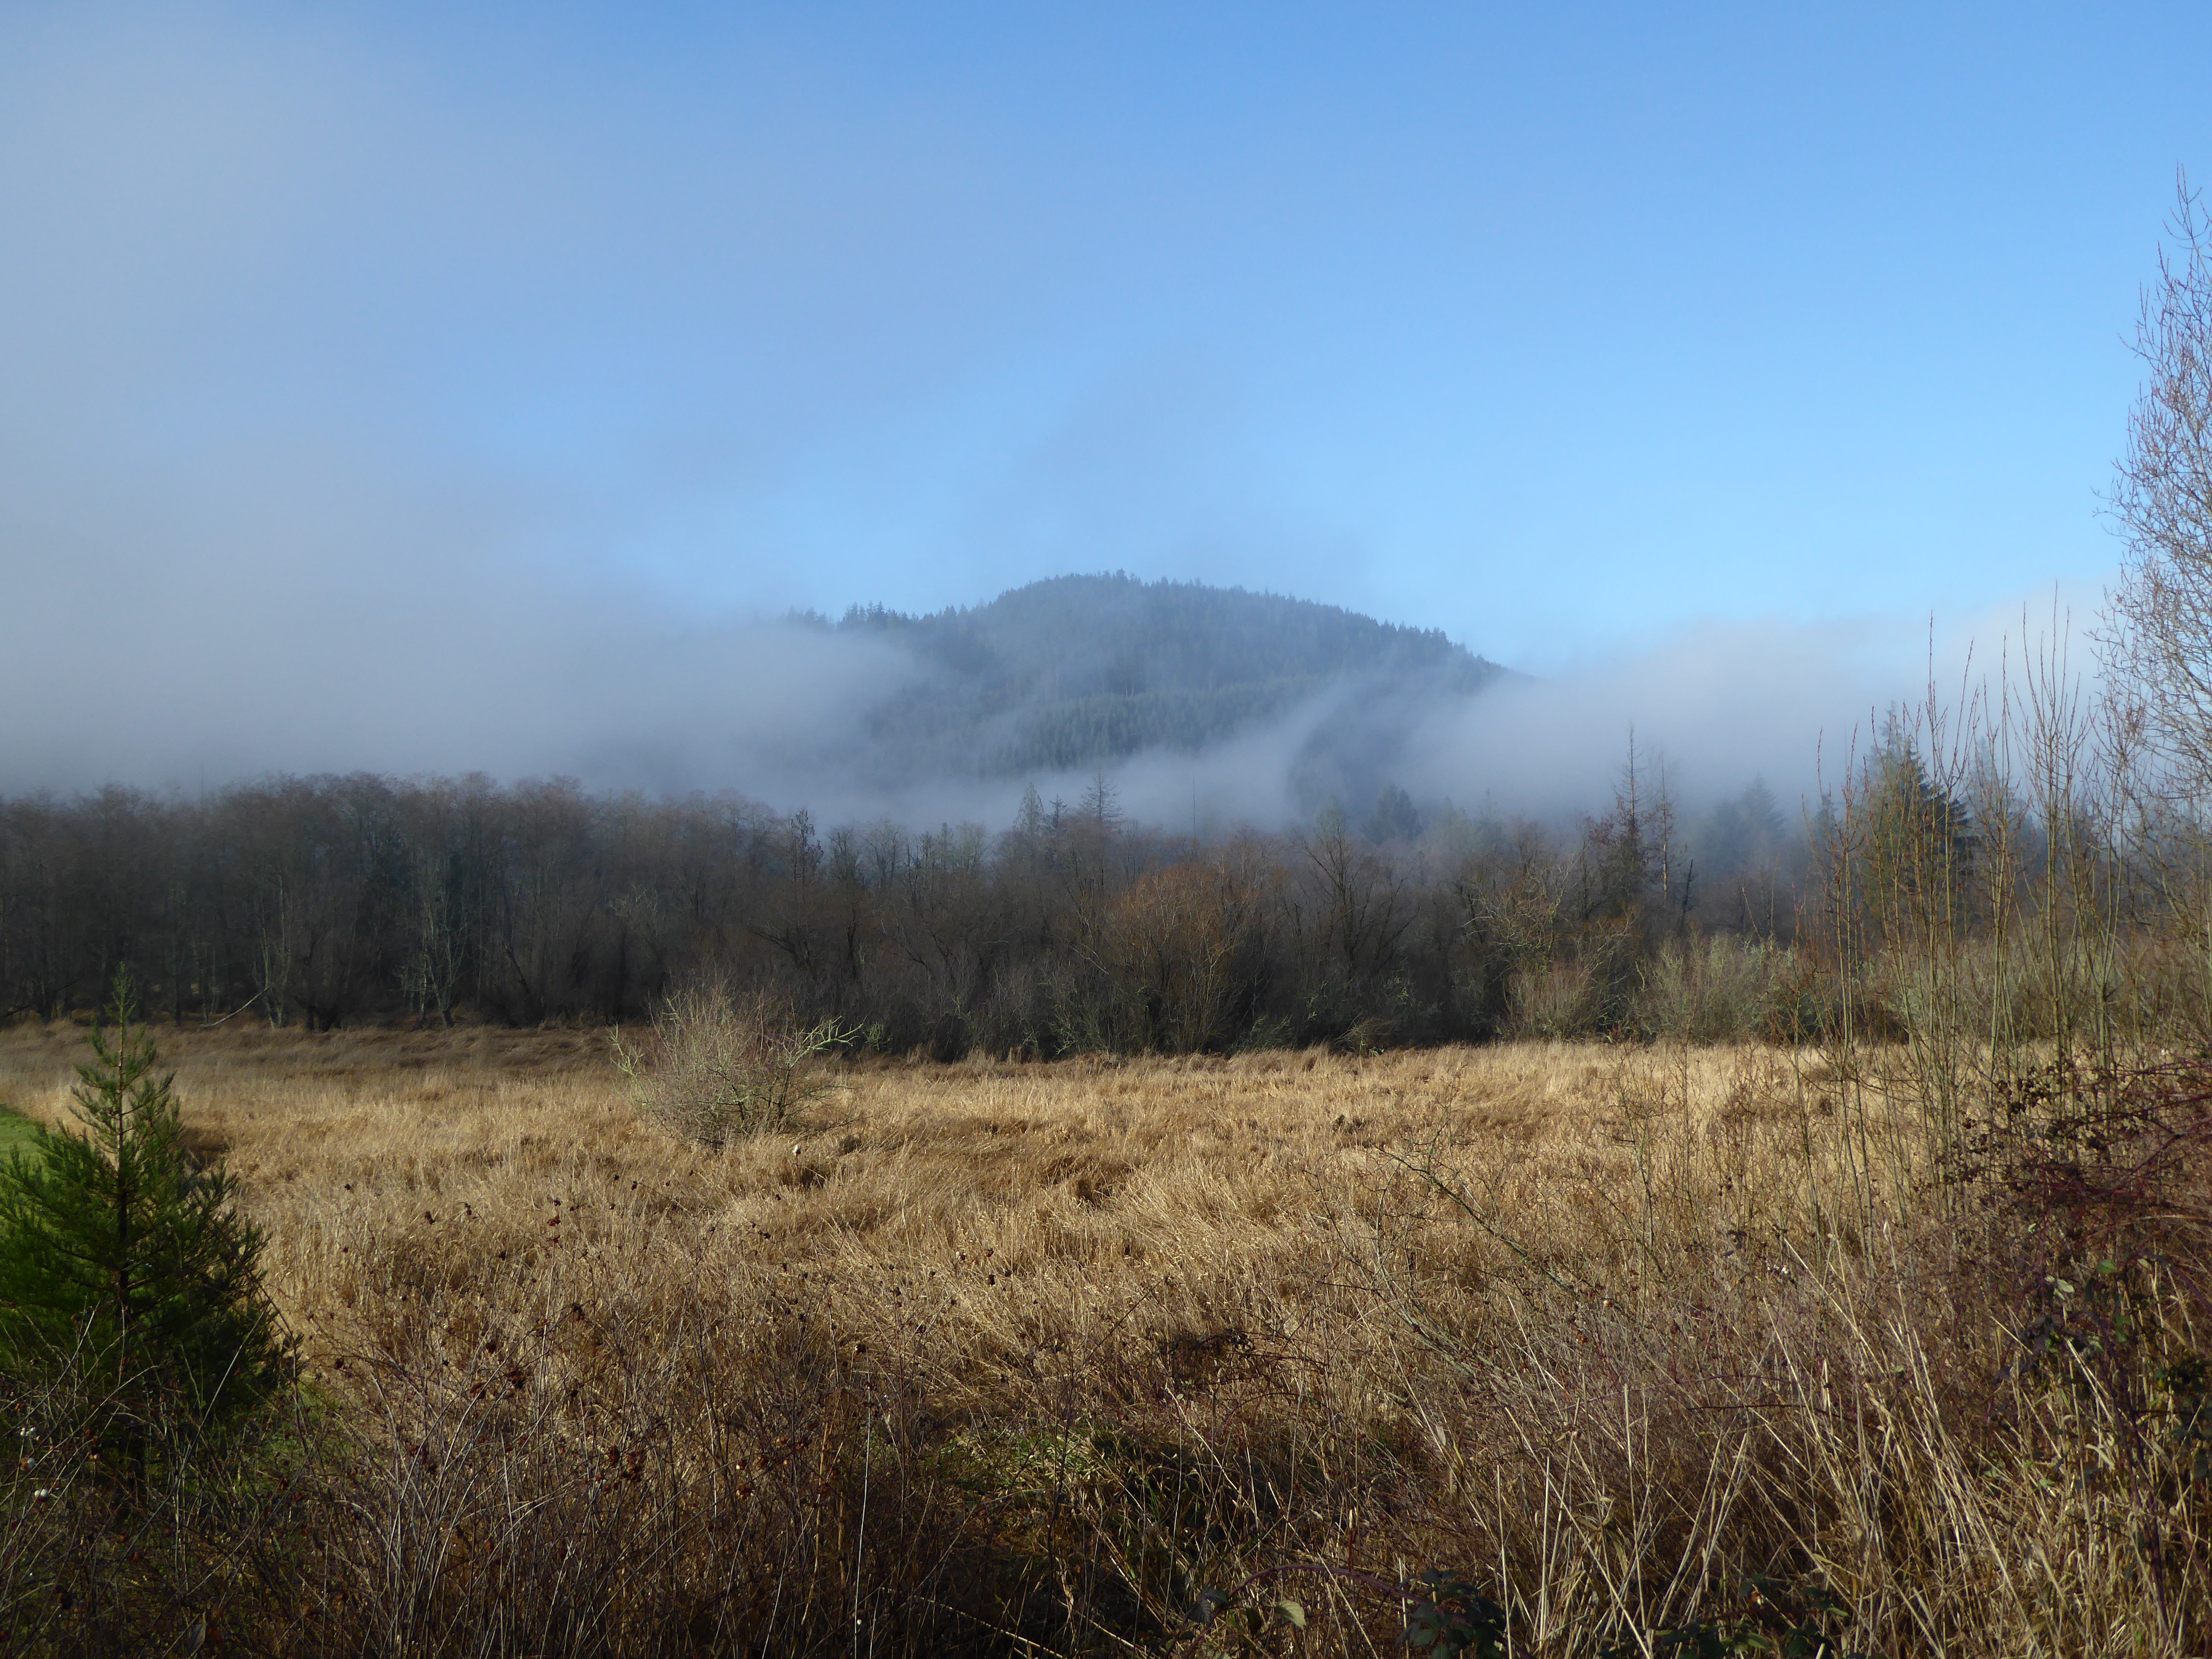 Early morning fog covers meadows in the Big Lake Wetlands Conservation Area in December. Photograph credit: Skagit Land Trust staff.